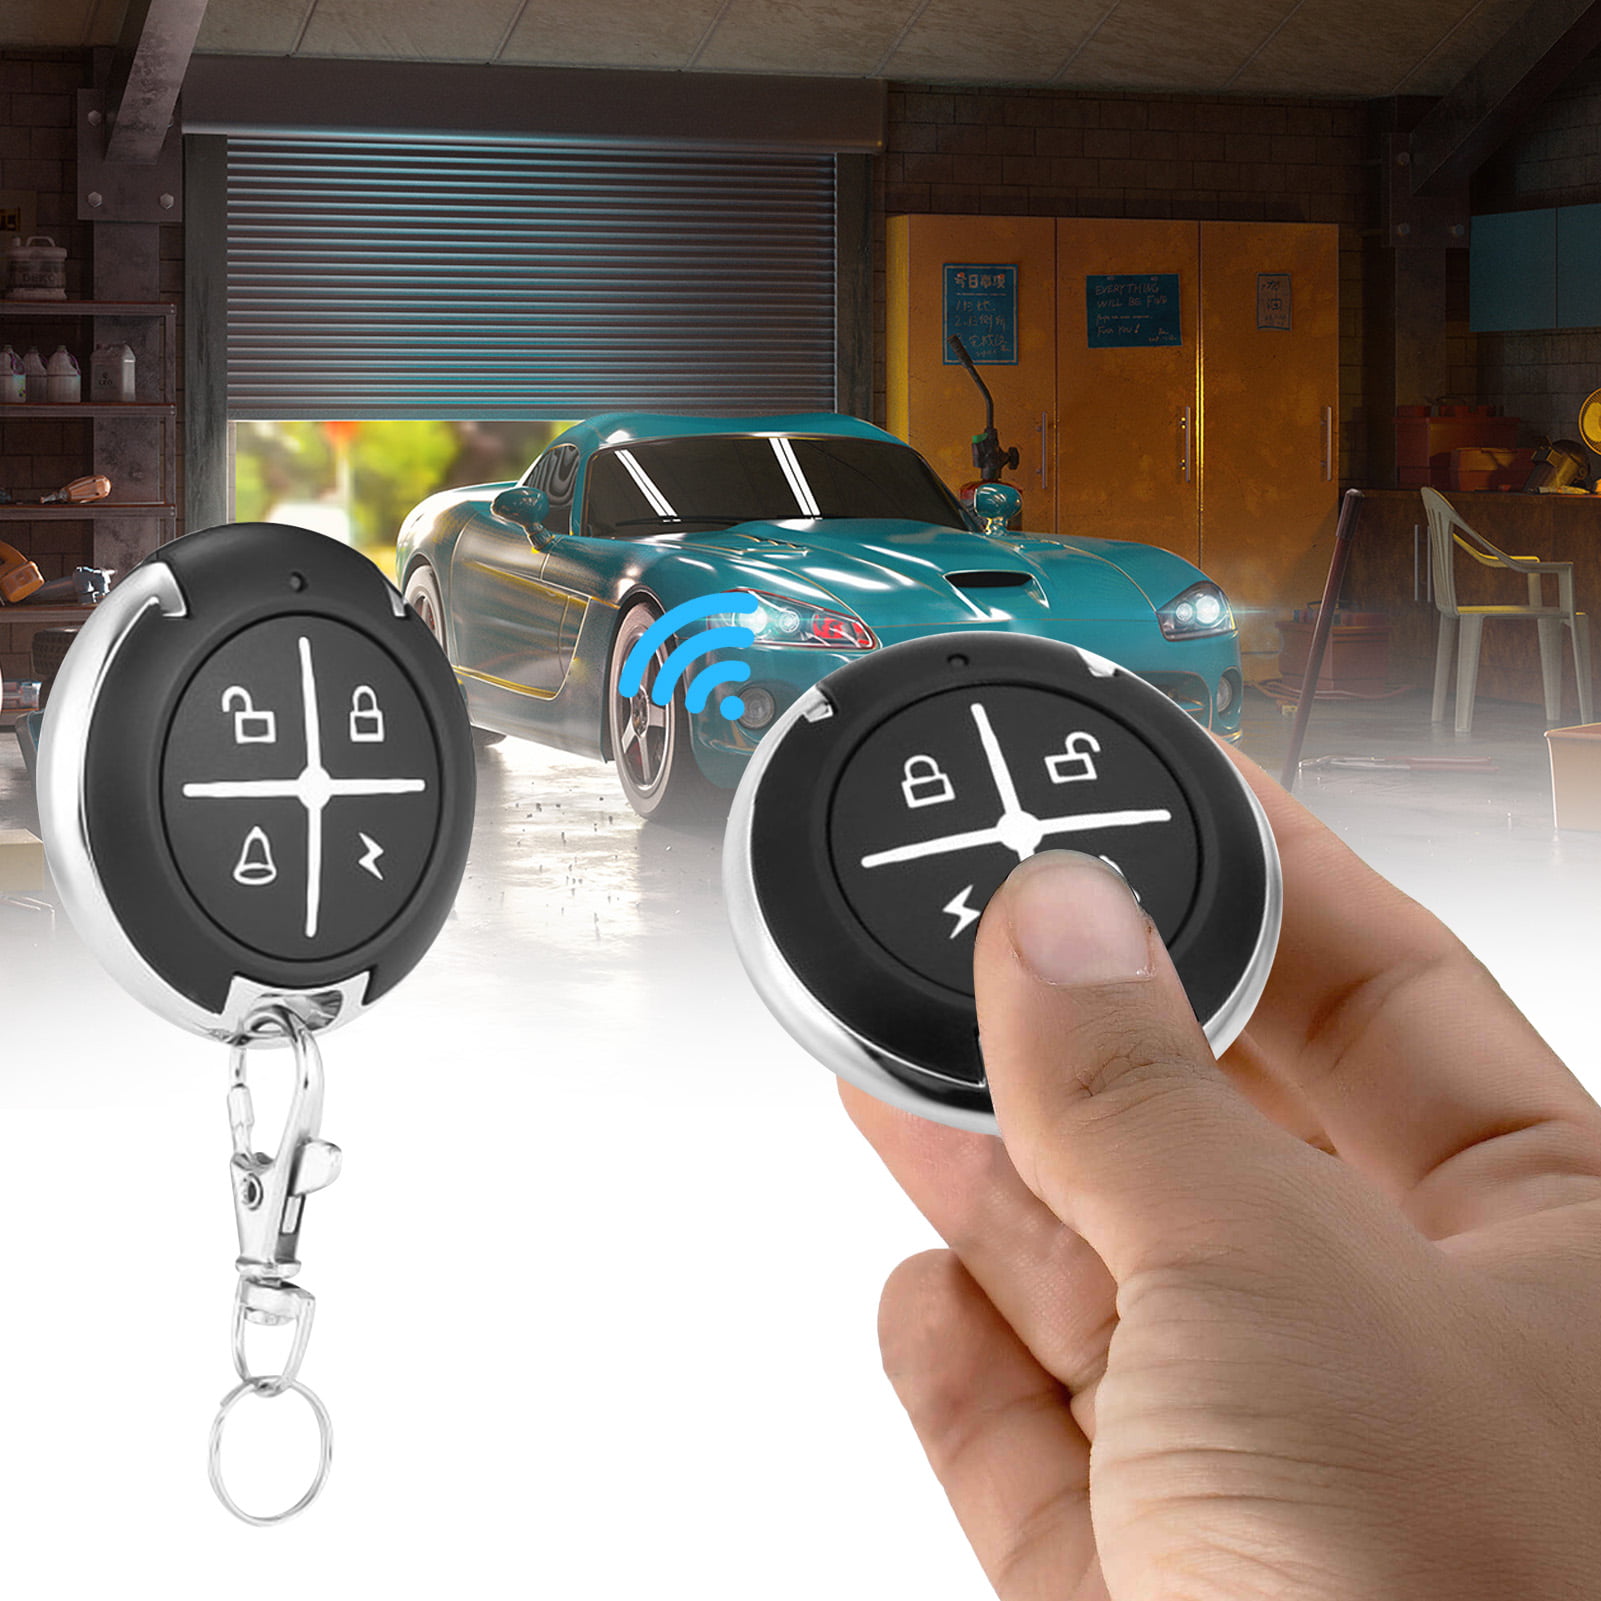 Details about   Button Remote Control 433MHZ Cloning Universal Replacement Garage Door/Car Gate. 